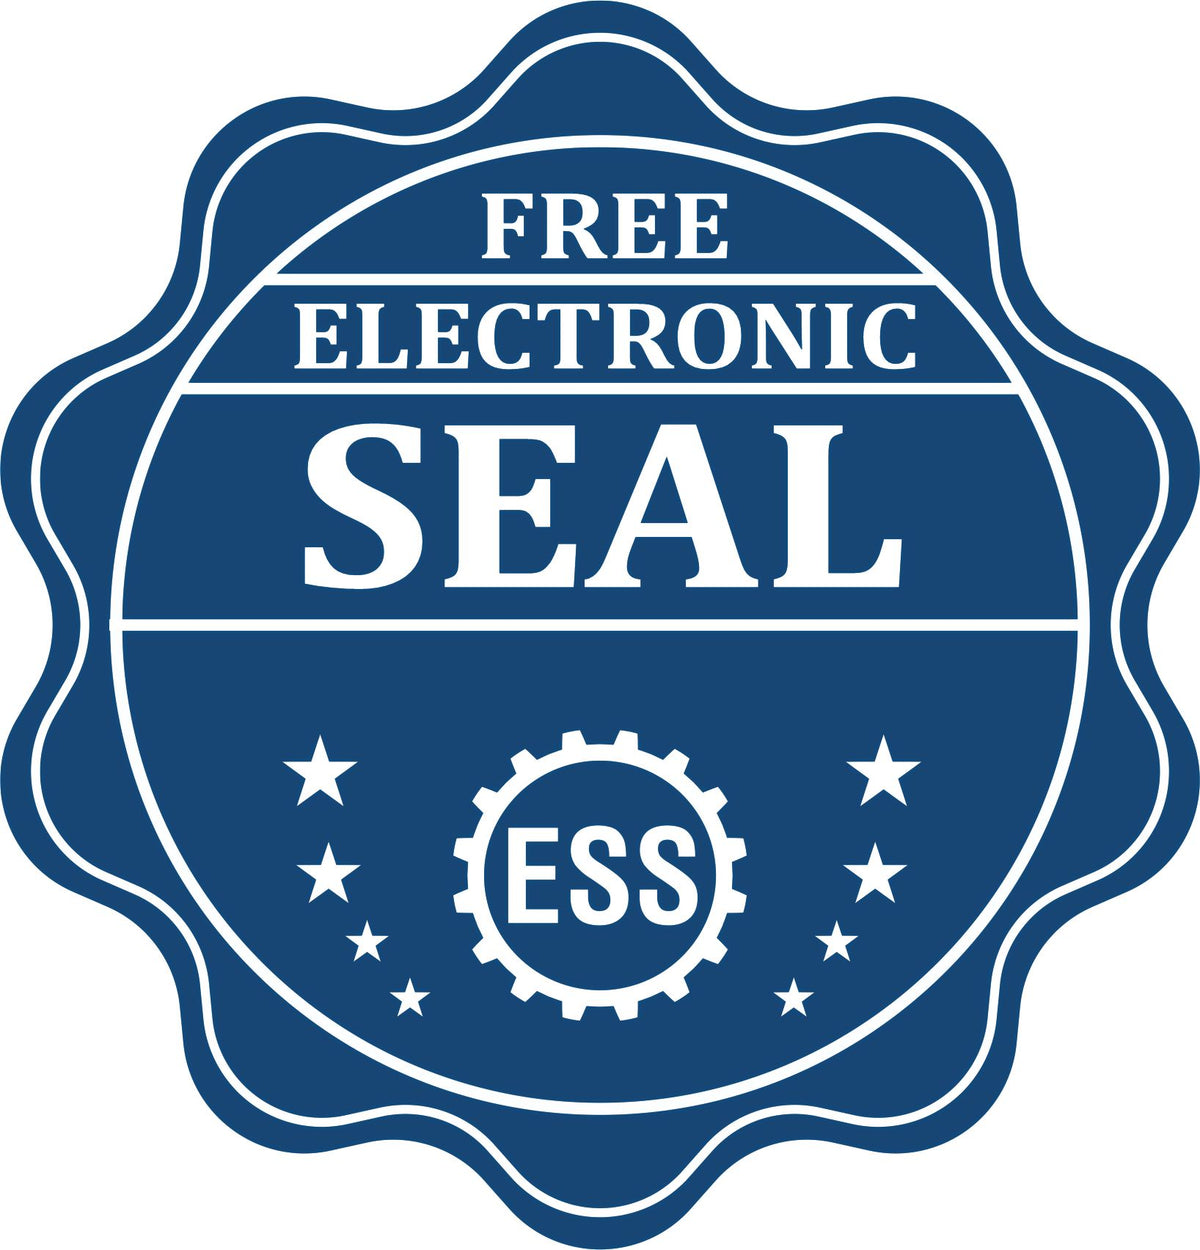 A badge showing a free electronic seal for the Indiana Geologist Desk Seal with stars and the ESS gear on the emblem.